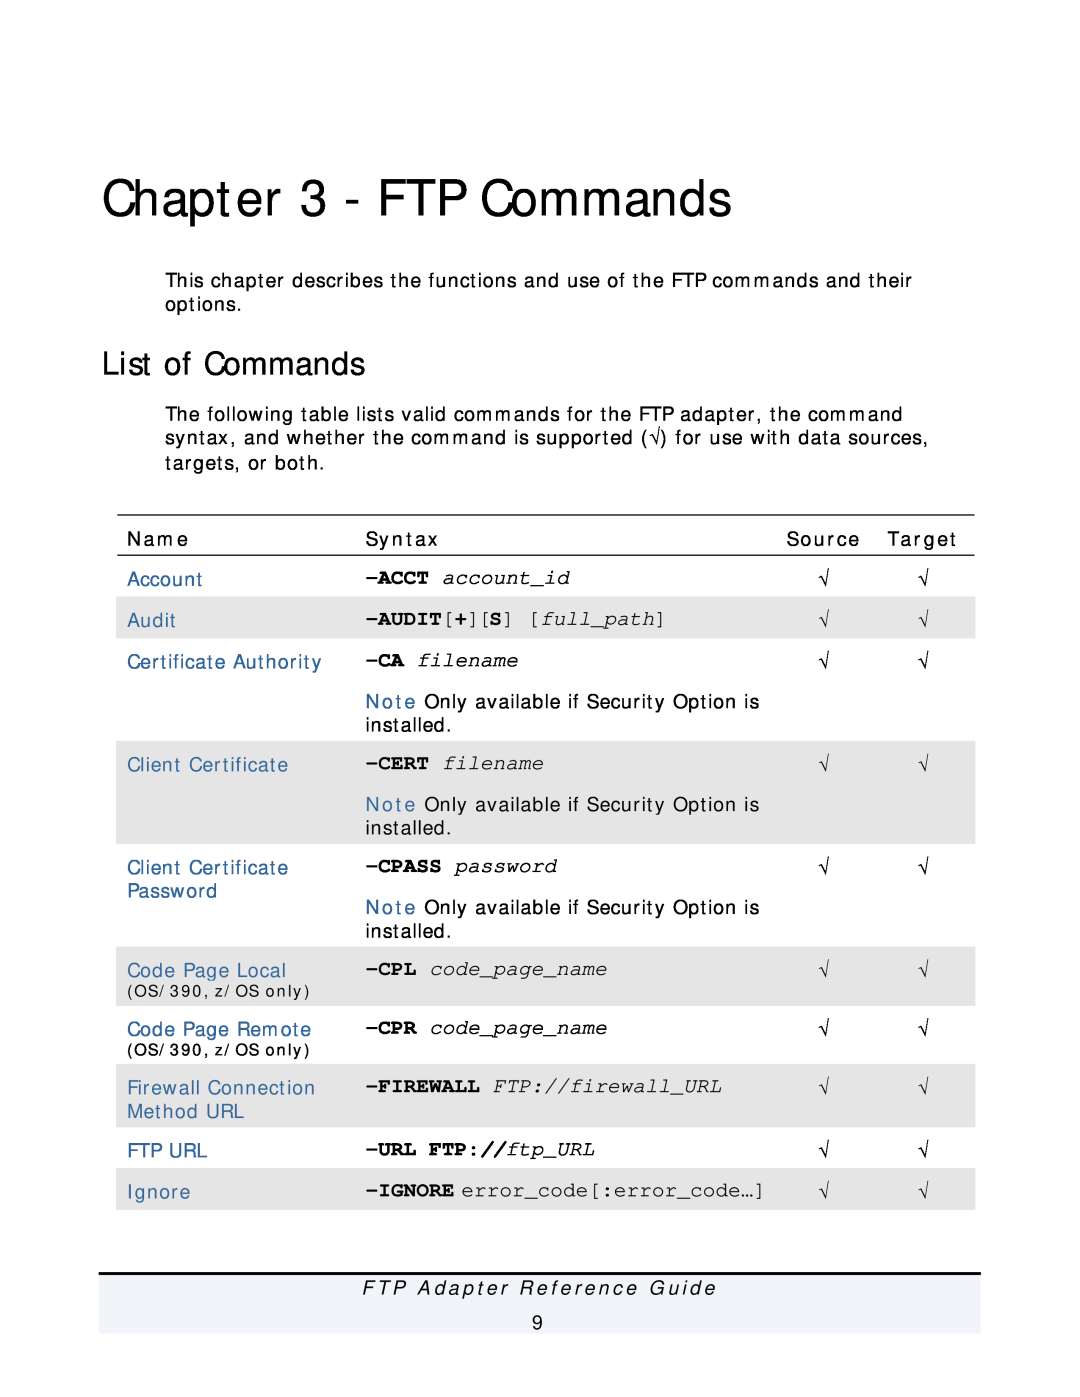 IBM FTP Adapter manual FTP Commands, List of Commands, ACCT accountid, AUDIT + S fullpath, CA filename, CERT filename, Name 